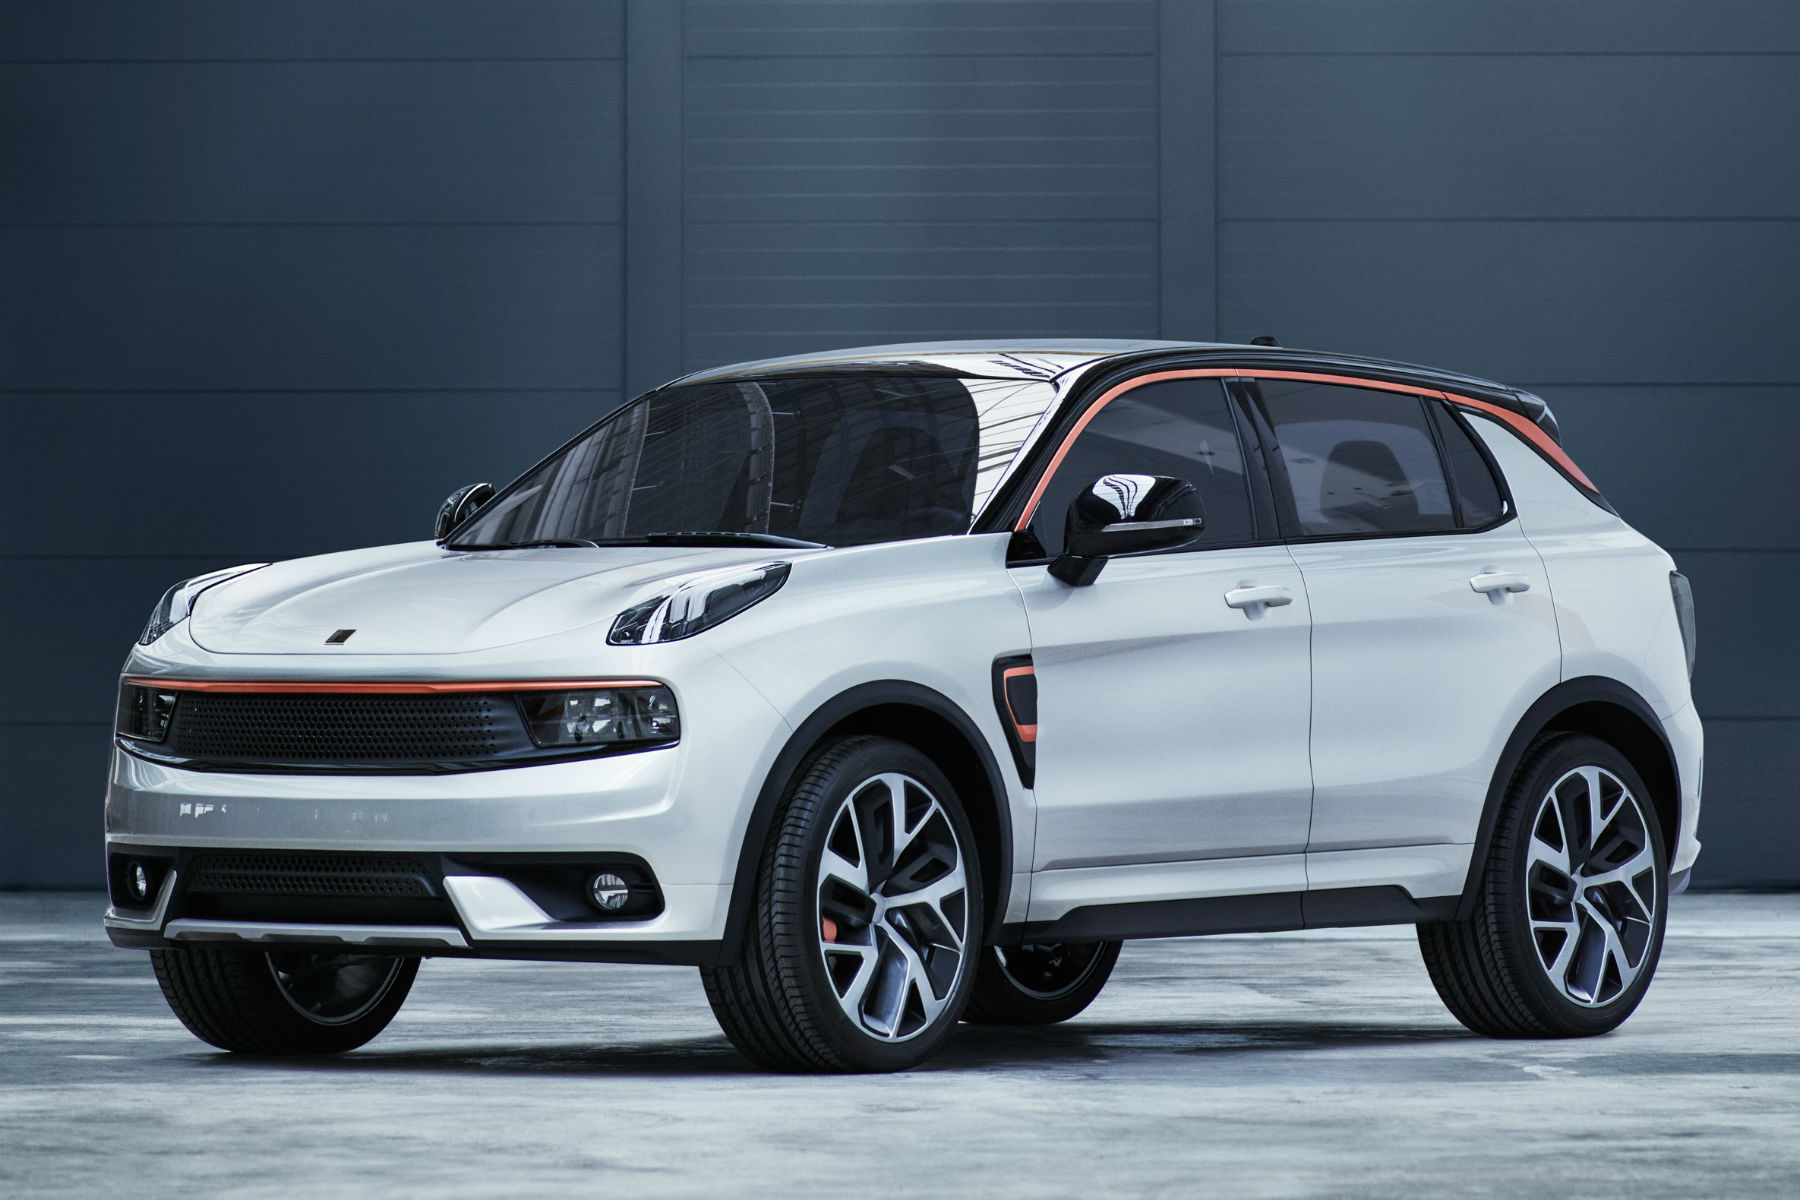  The Lynk & Co 01